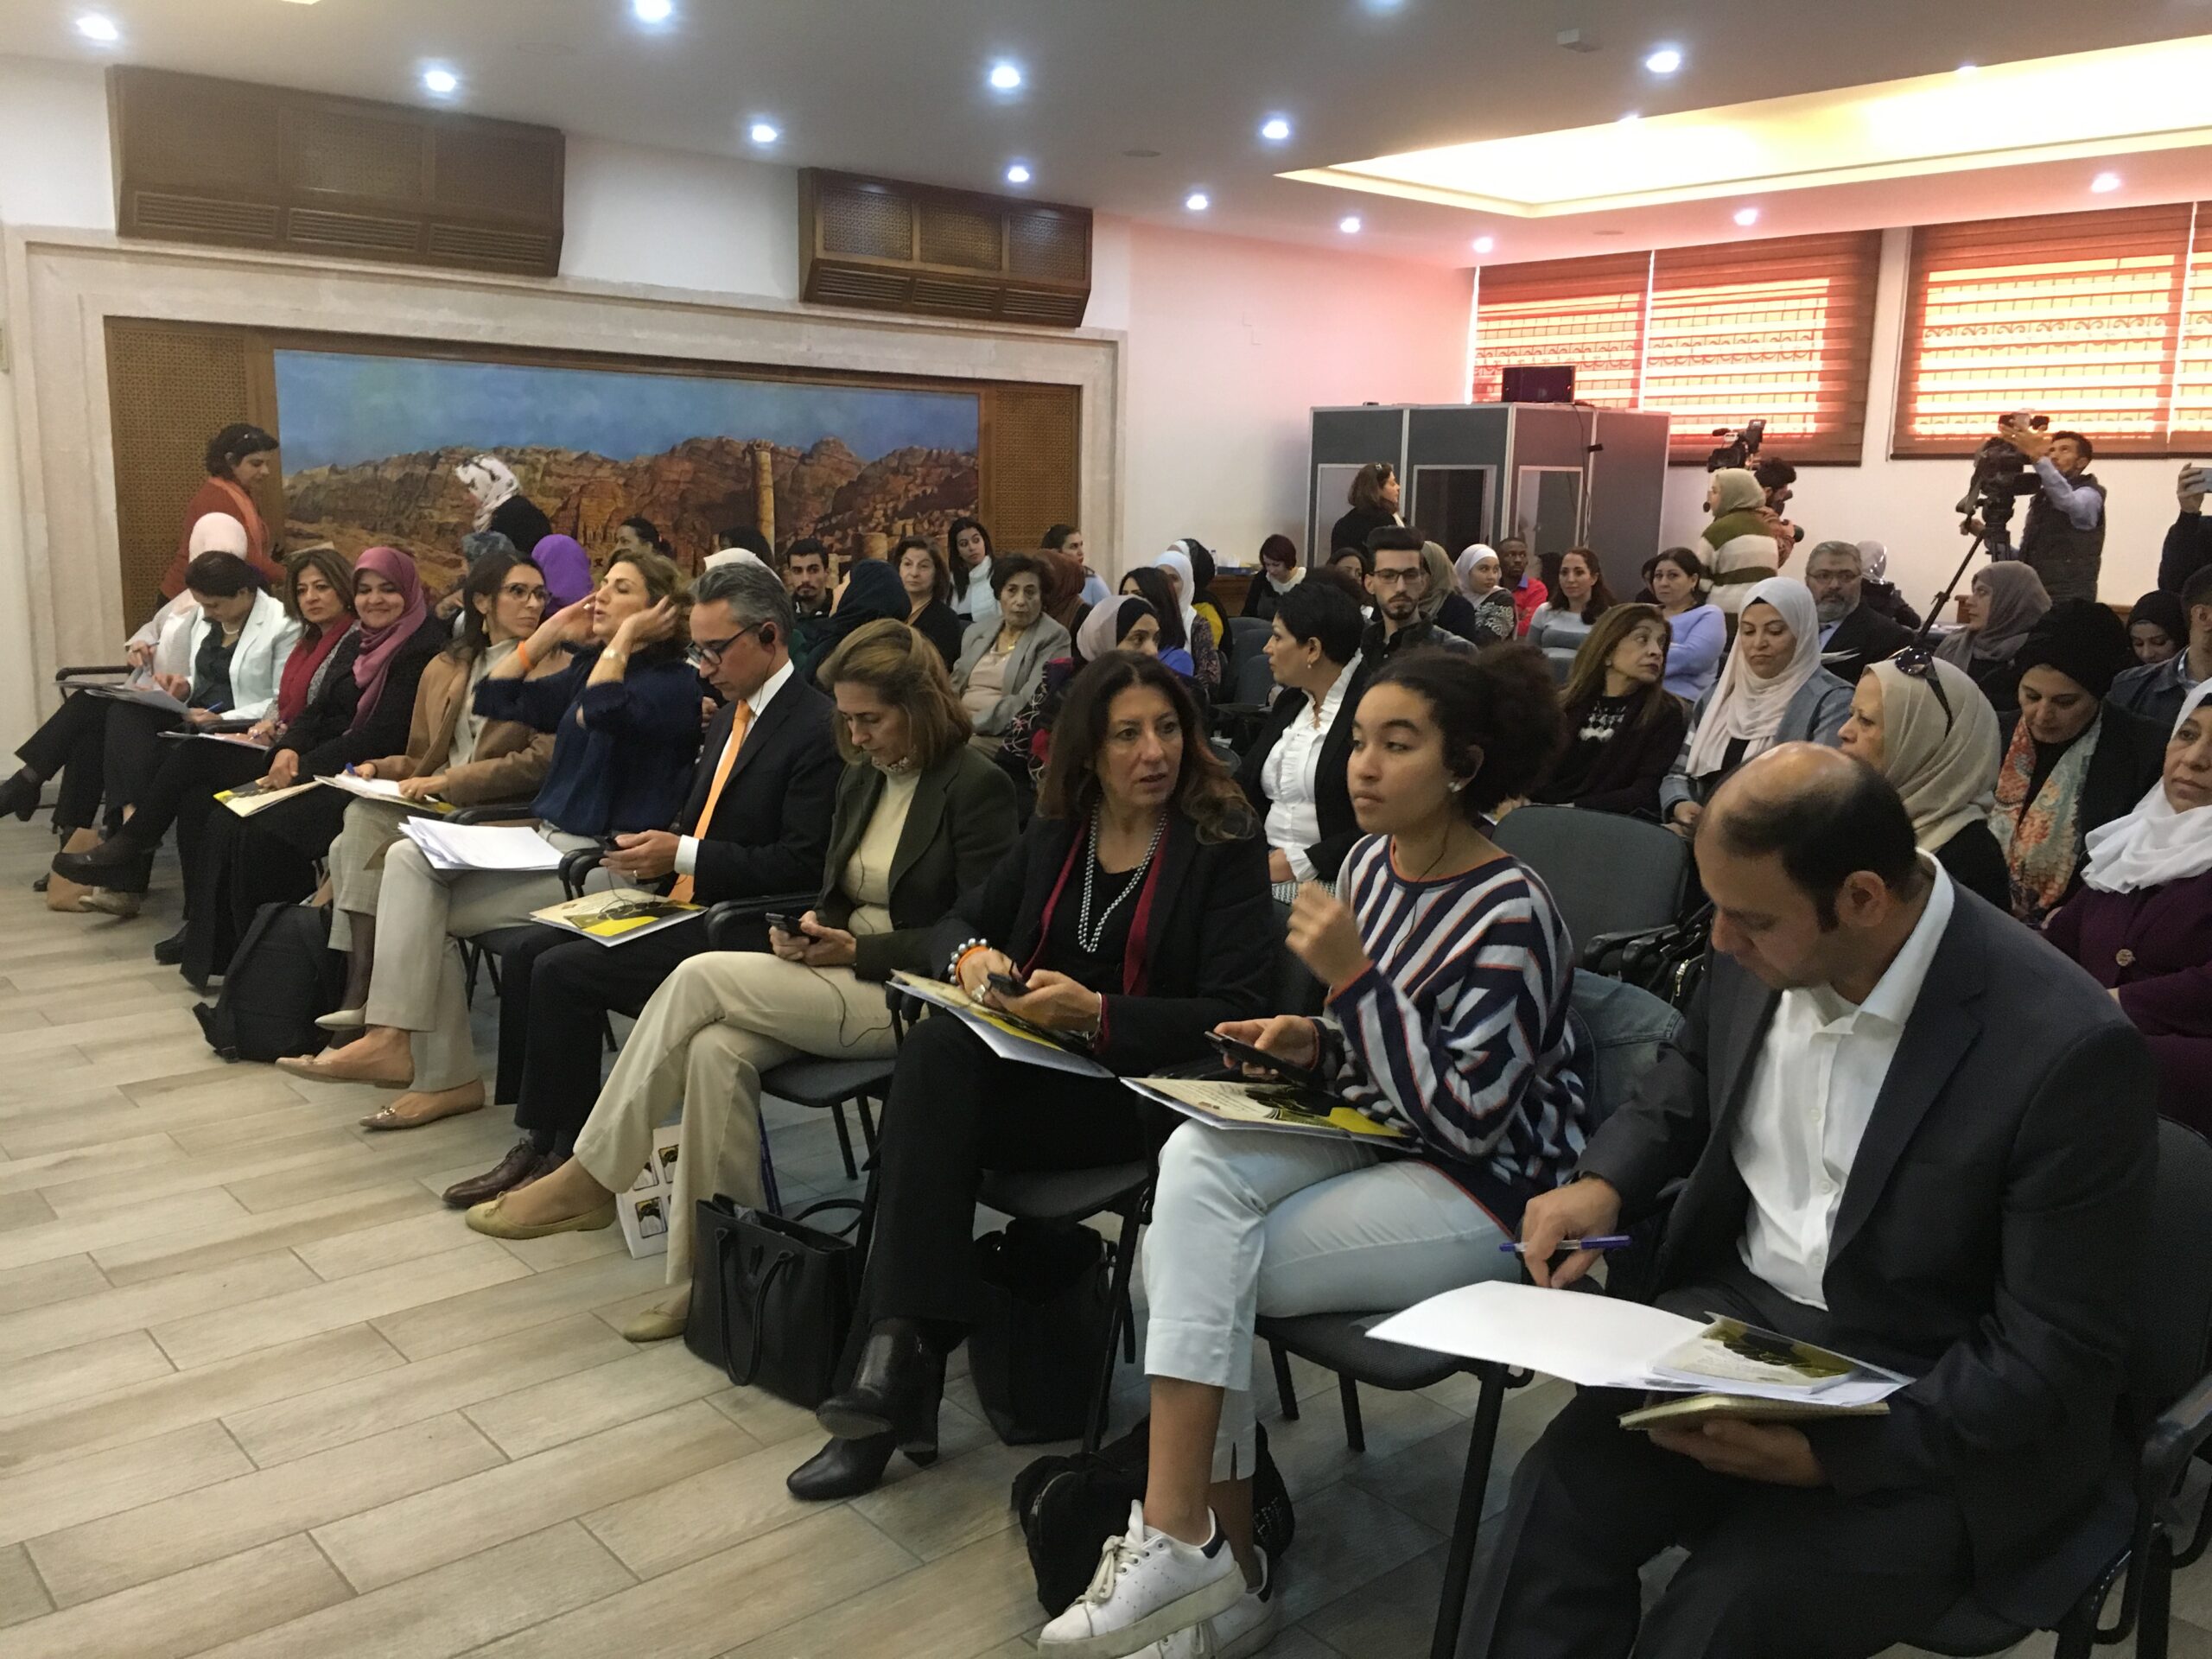 16 Days Campaign in Jordan… Breaking the Silence on Economic Violence